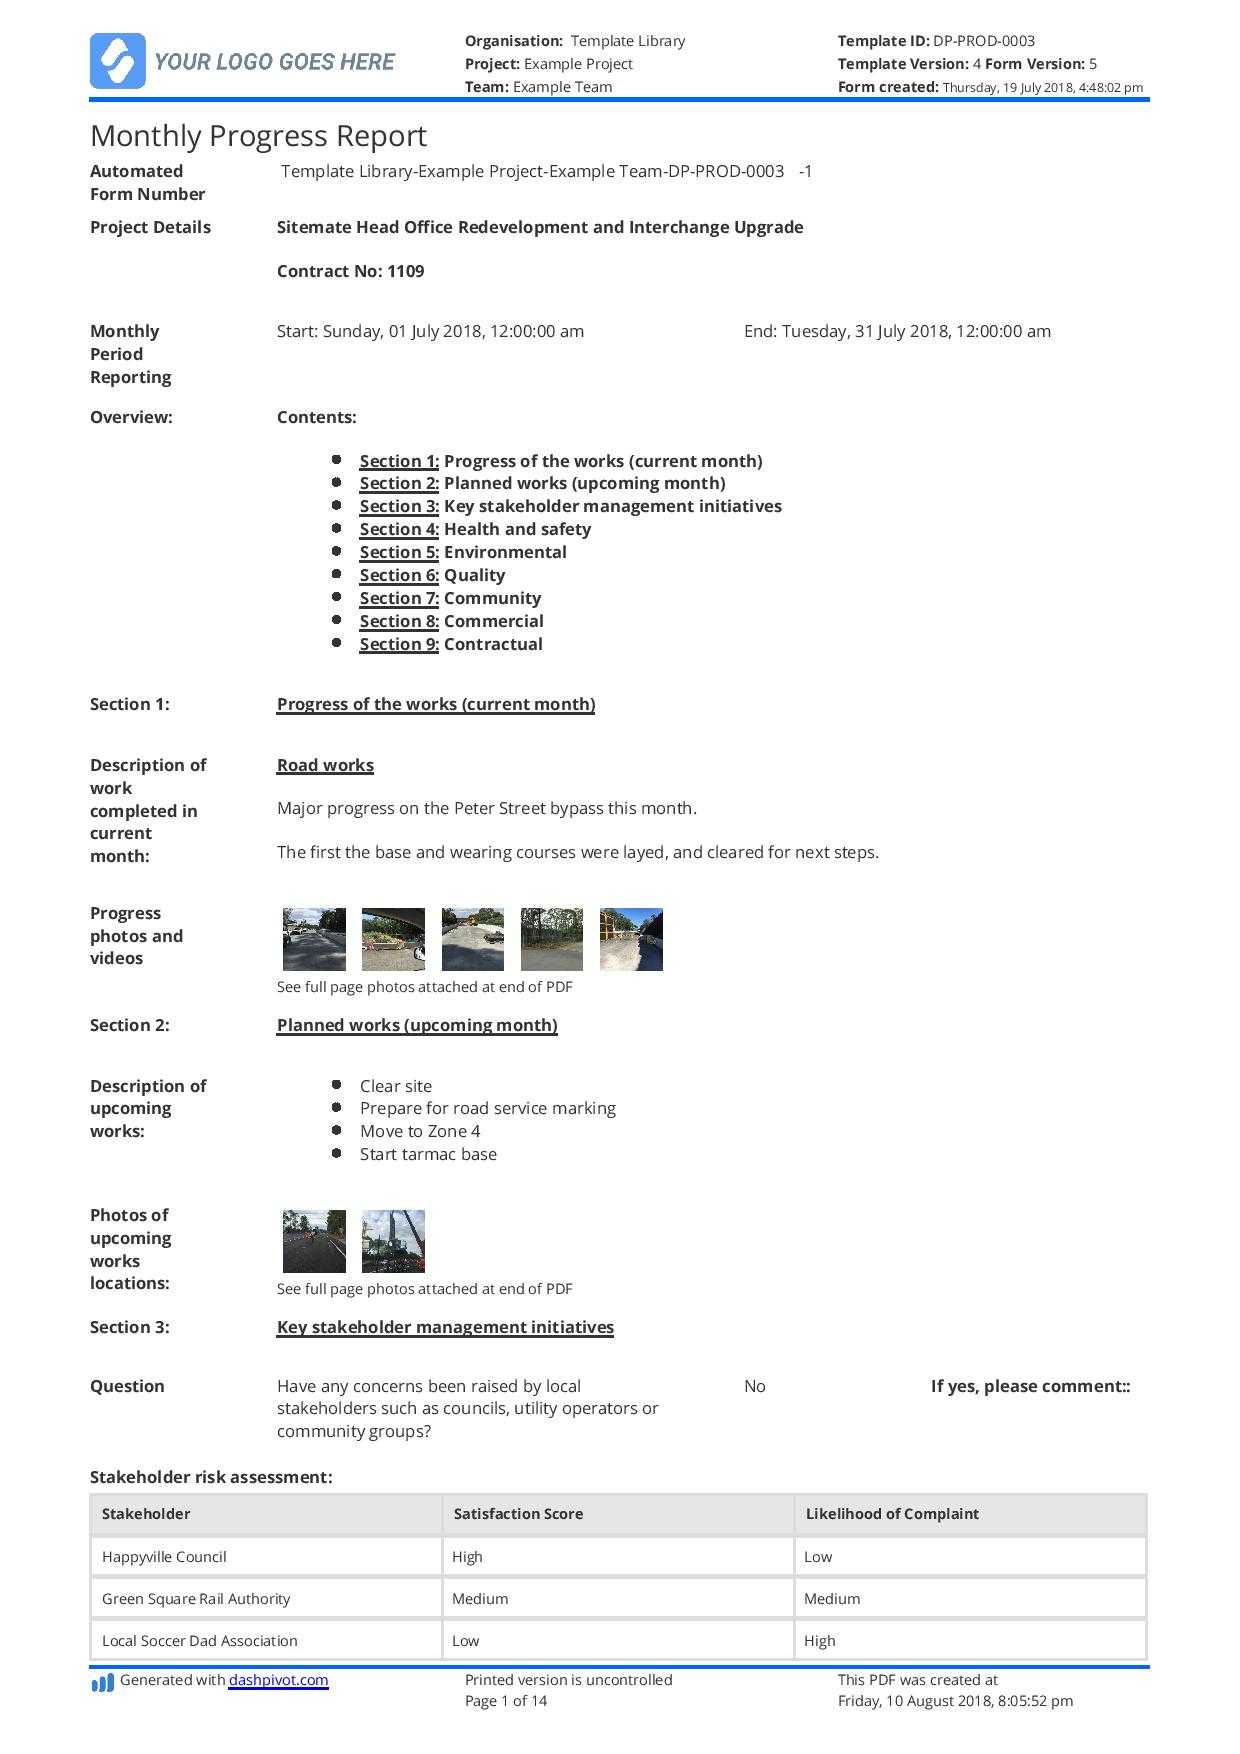 Monthly Construction Progress Report Template: Use This With Engineering Progress Report Template